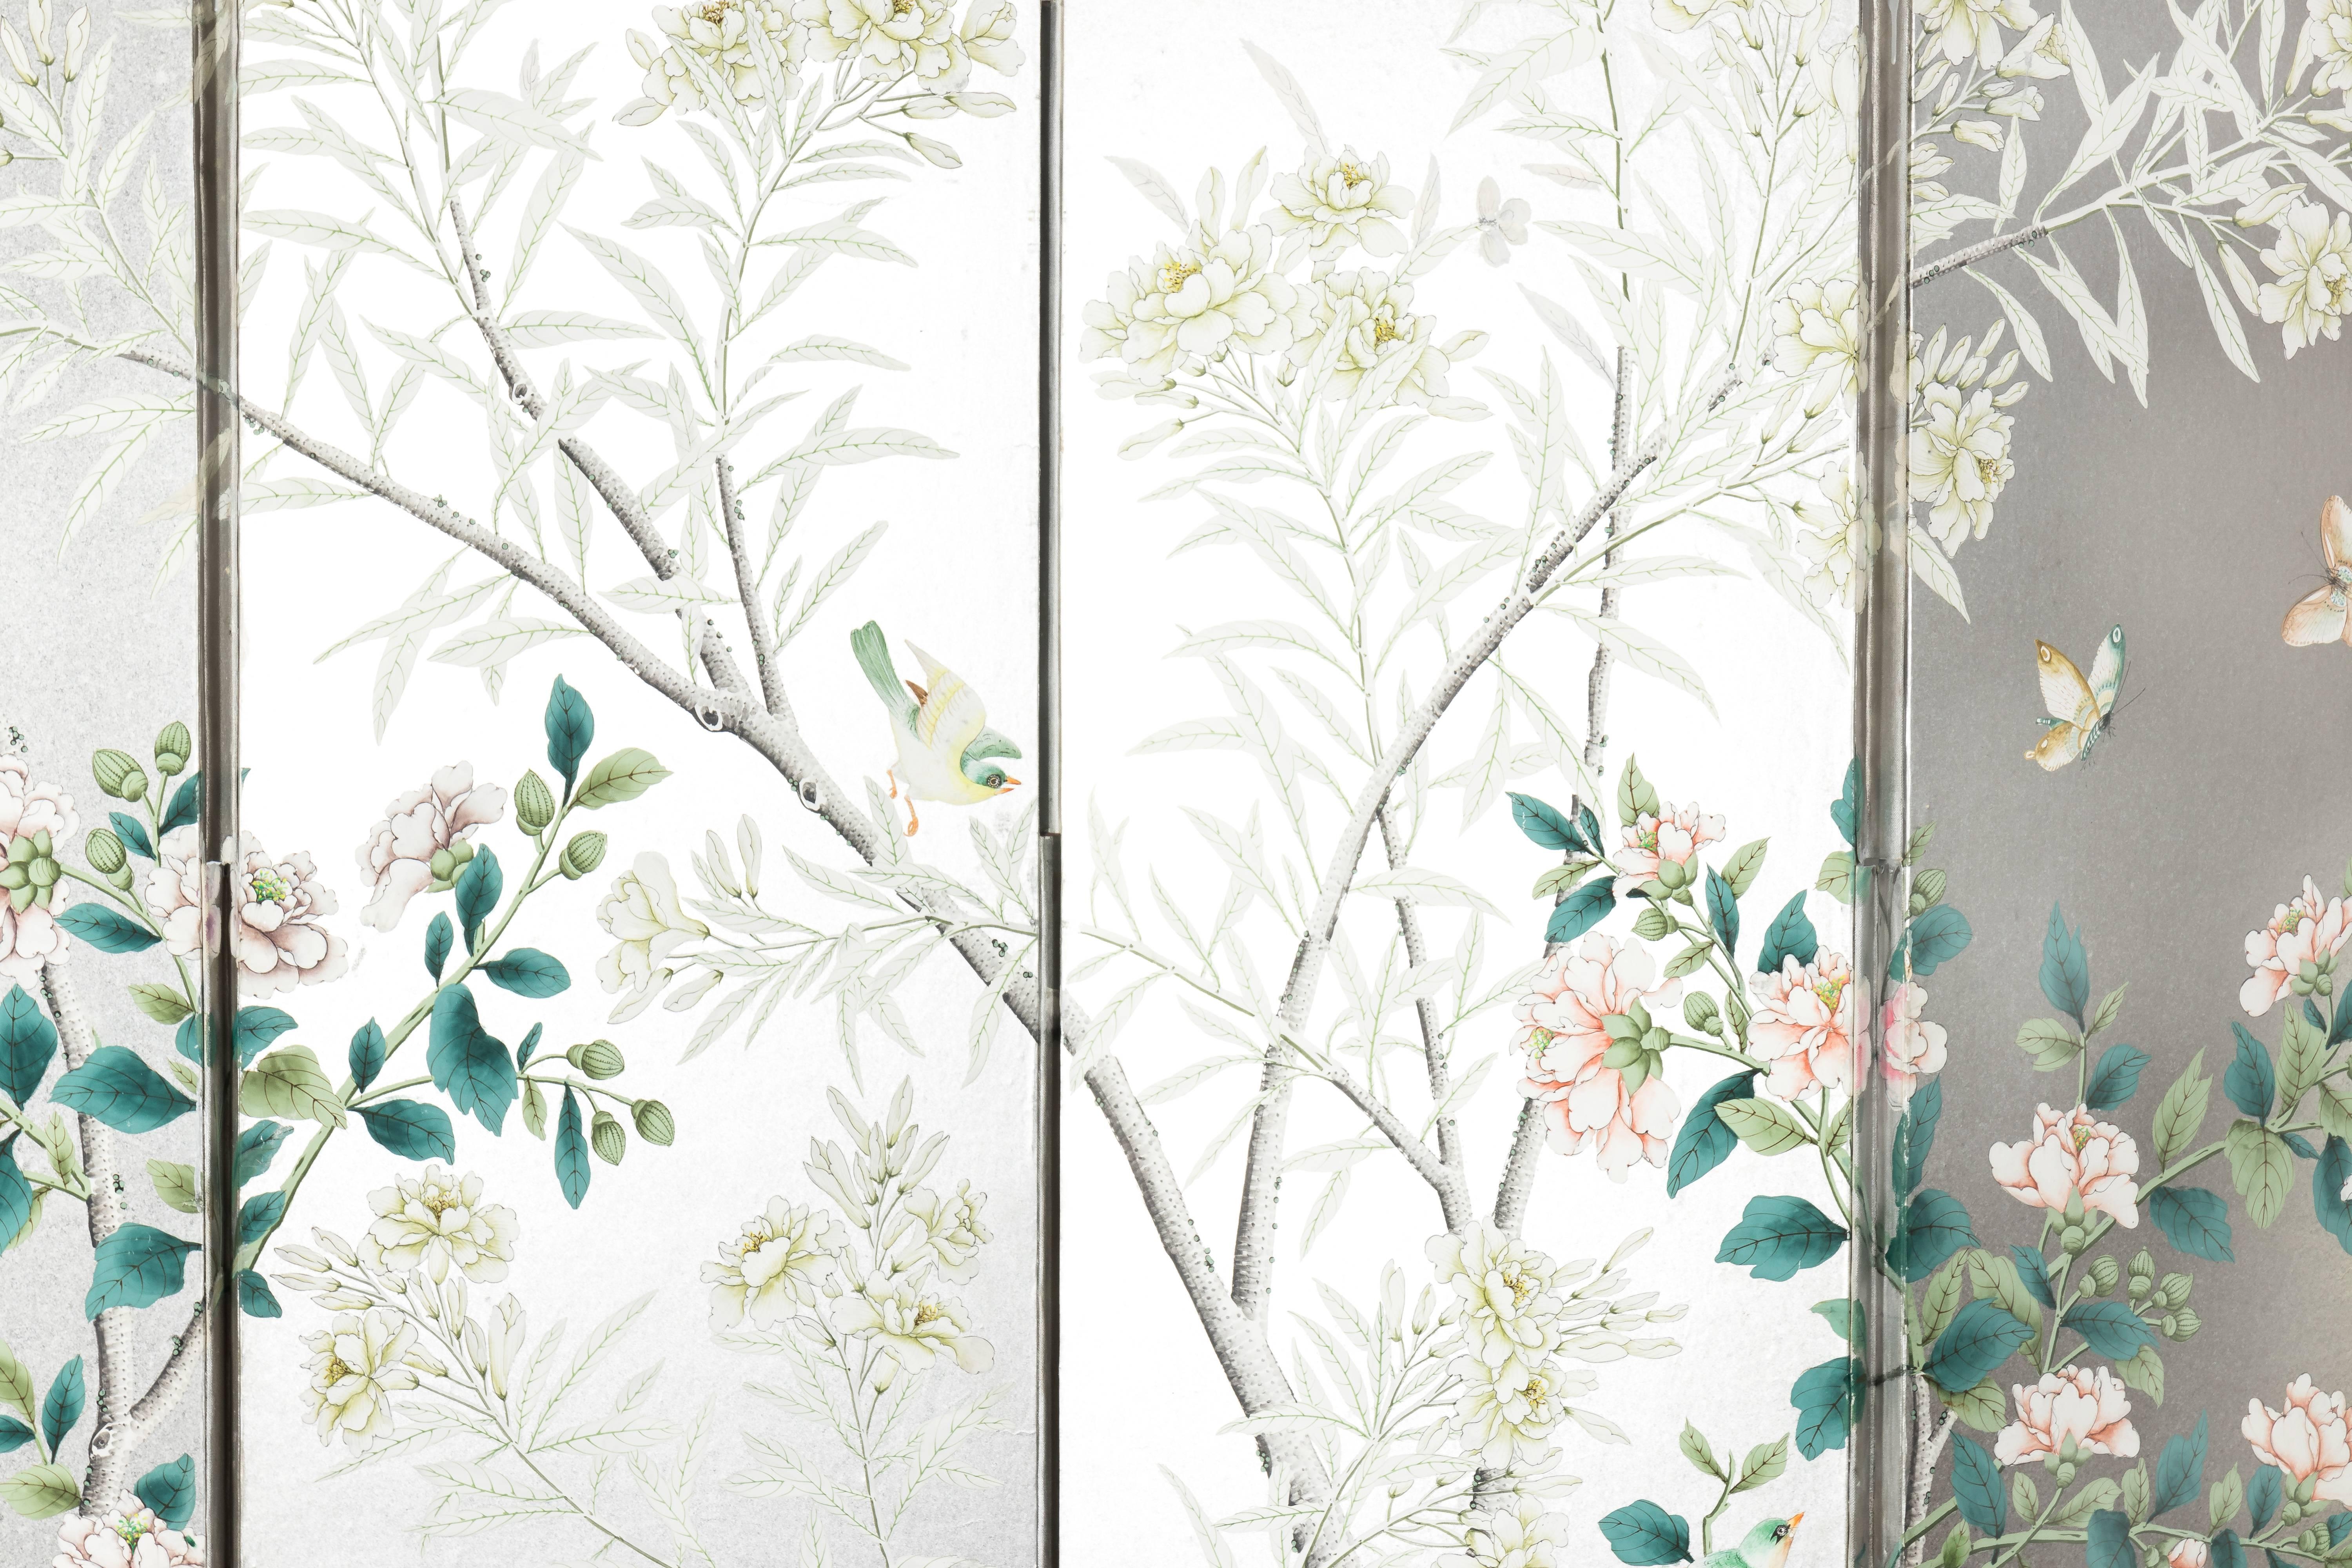 Silver four-panel Chinese screen by Gracie. All-over hand-painted floral design with bird and butterfly accents. Back of the screen is newly painted a pale gray. Screen is constructed of wood with paper and paint overlaid.